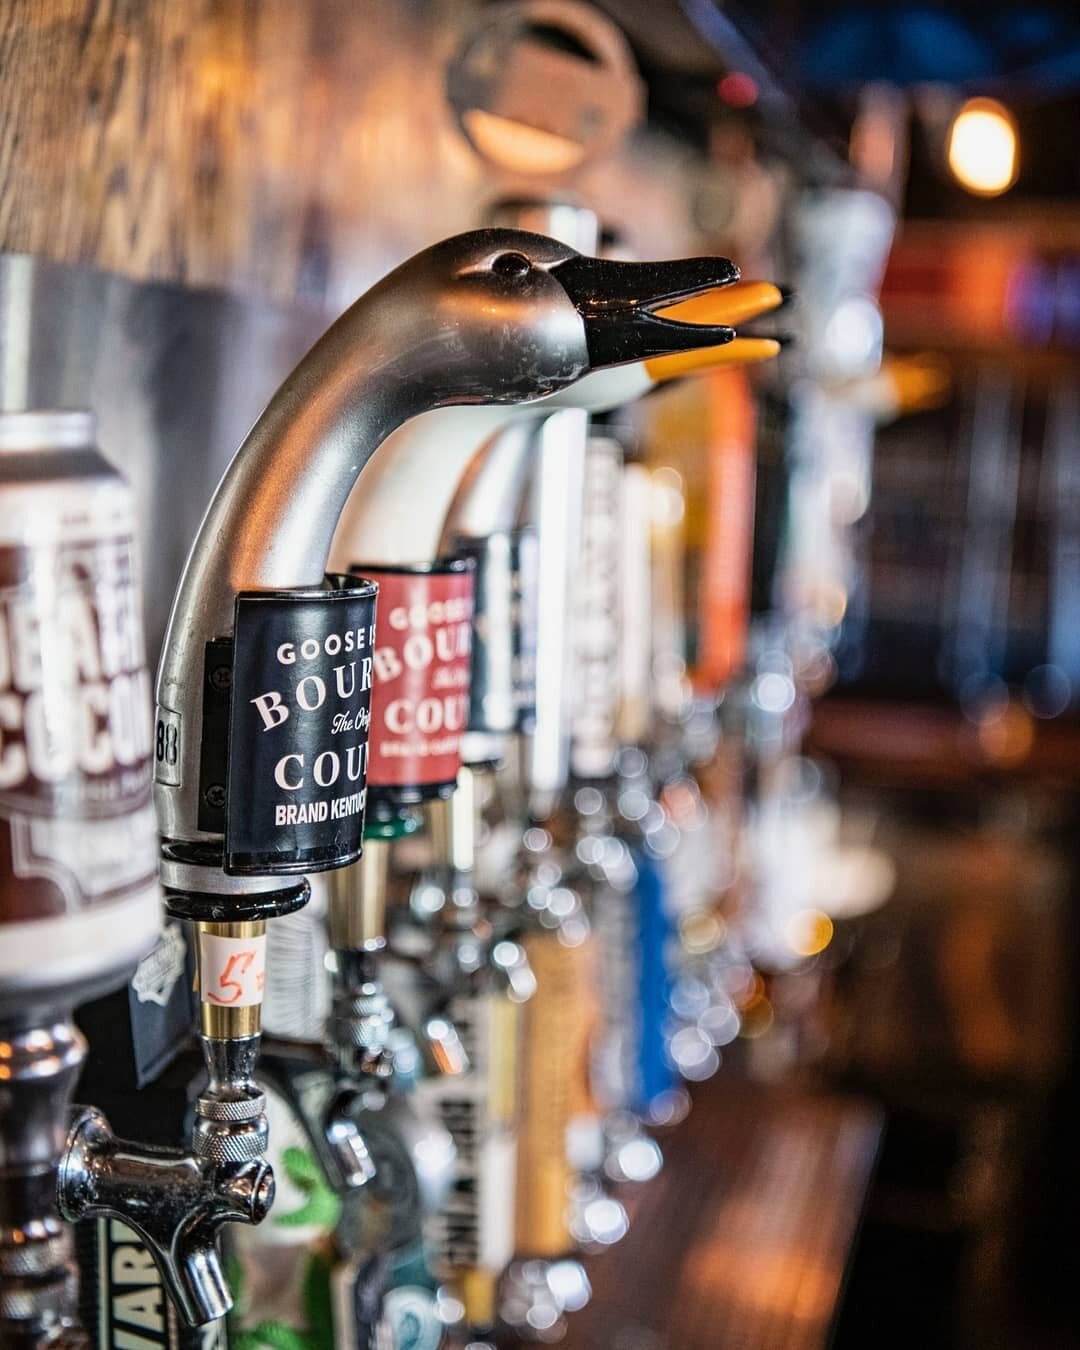 You're going to LOVE our incredible selection of cold drafts here at SOHA Bar &amp; Grill. Come see us today and wash down all your favorite eats as we serve from 4-11pm. Dine-in, patio service and carryout.
​.
​​#sohabarandgrill #stlbeer #stlbars